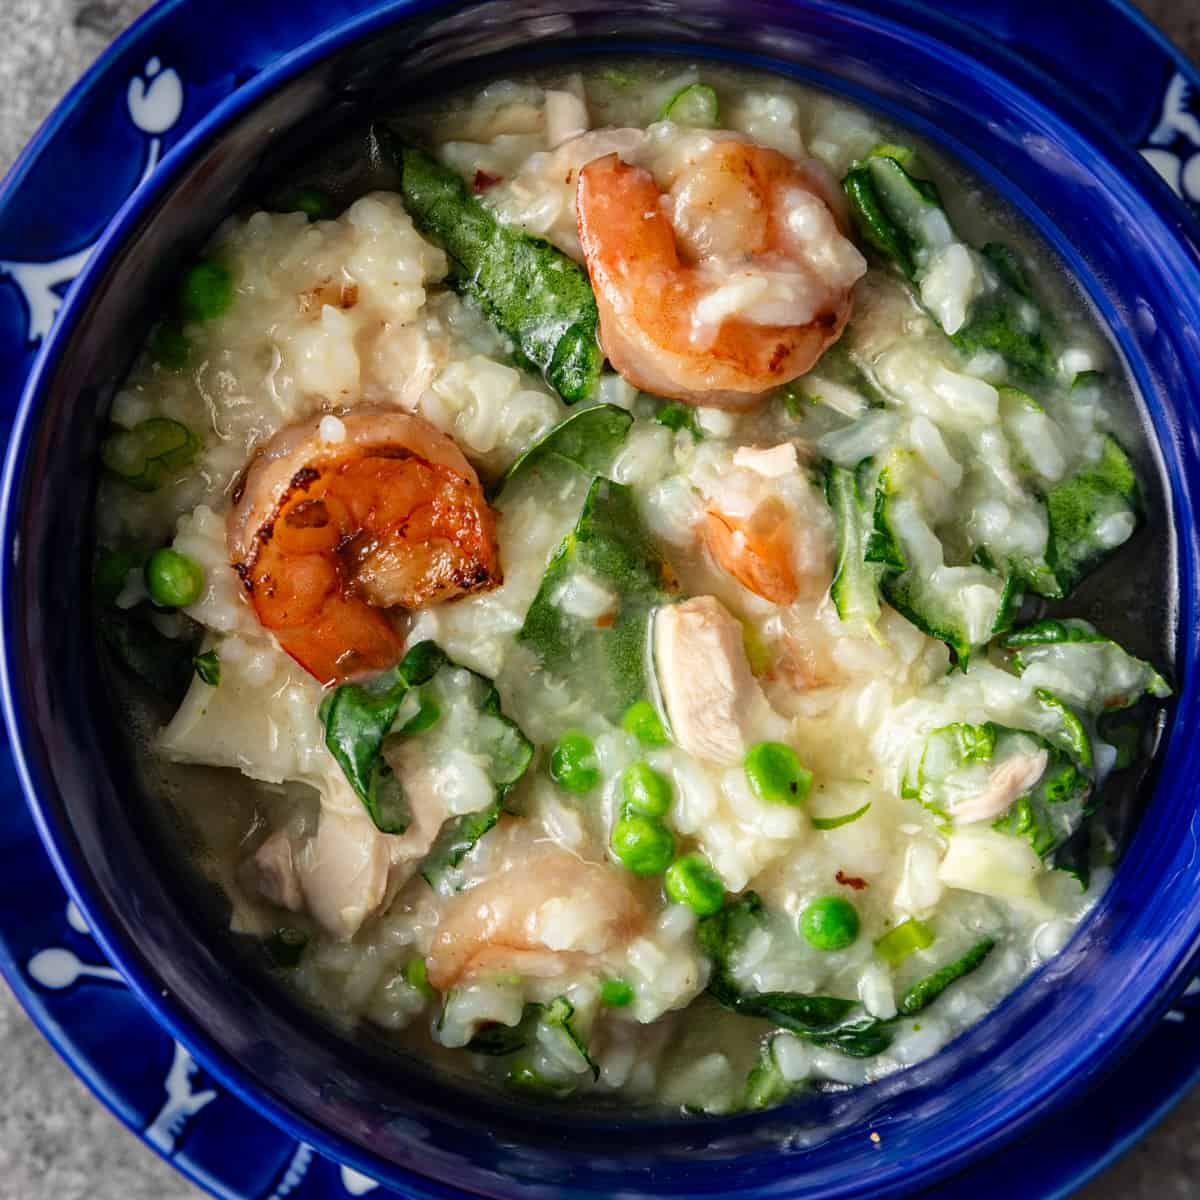 overhead: a bowl of congee with shrimp and veggies visible 